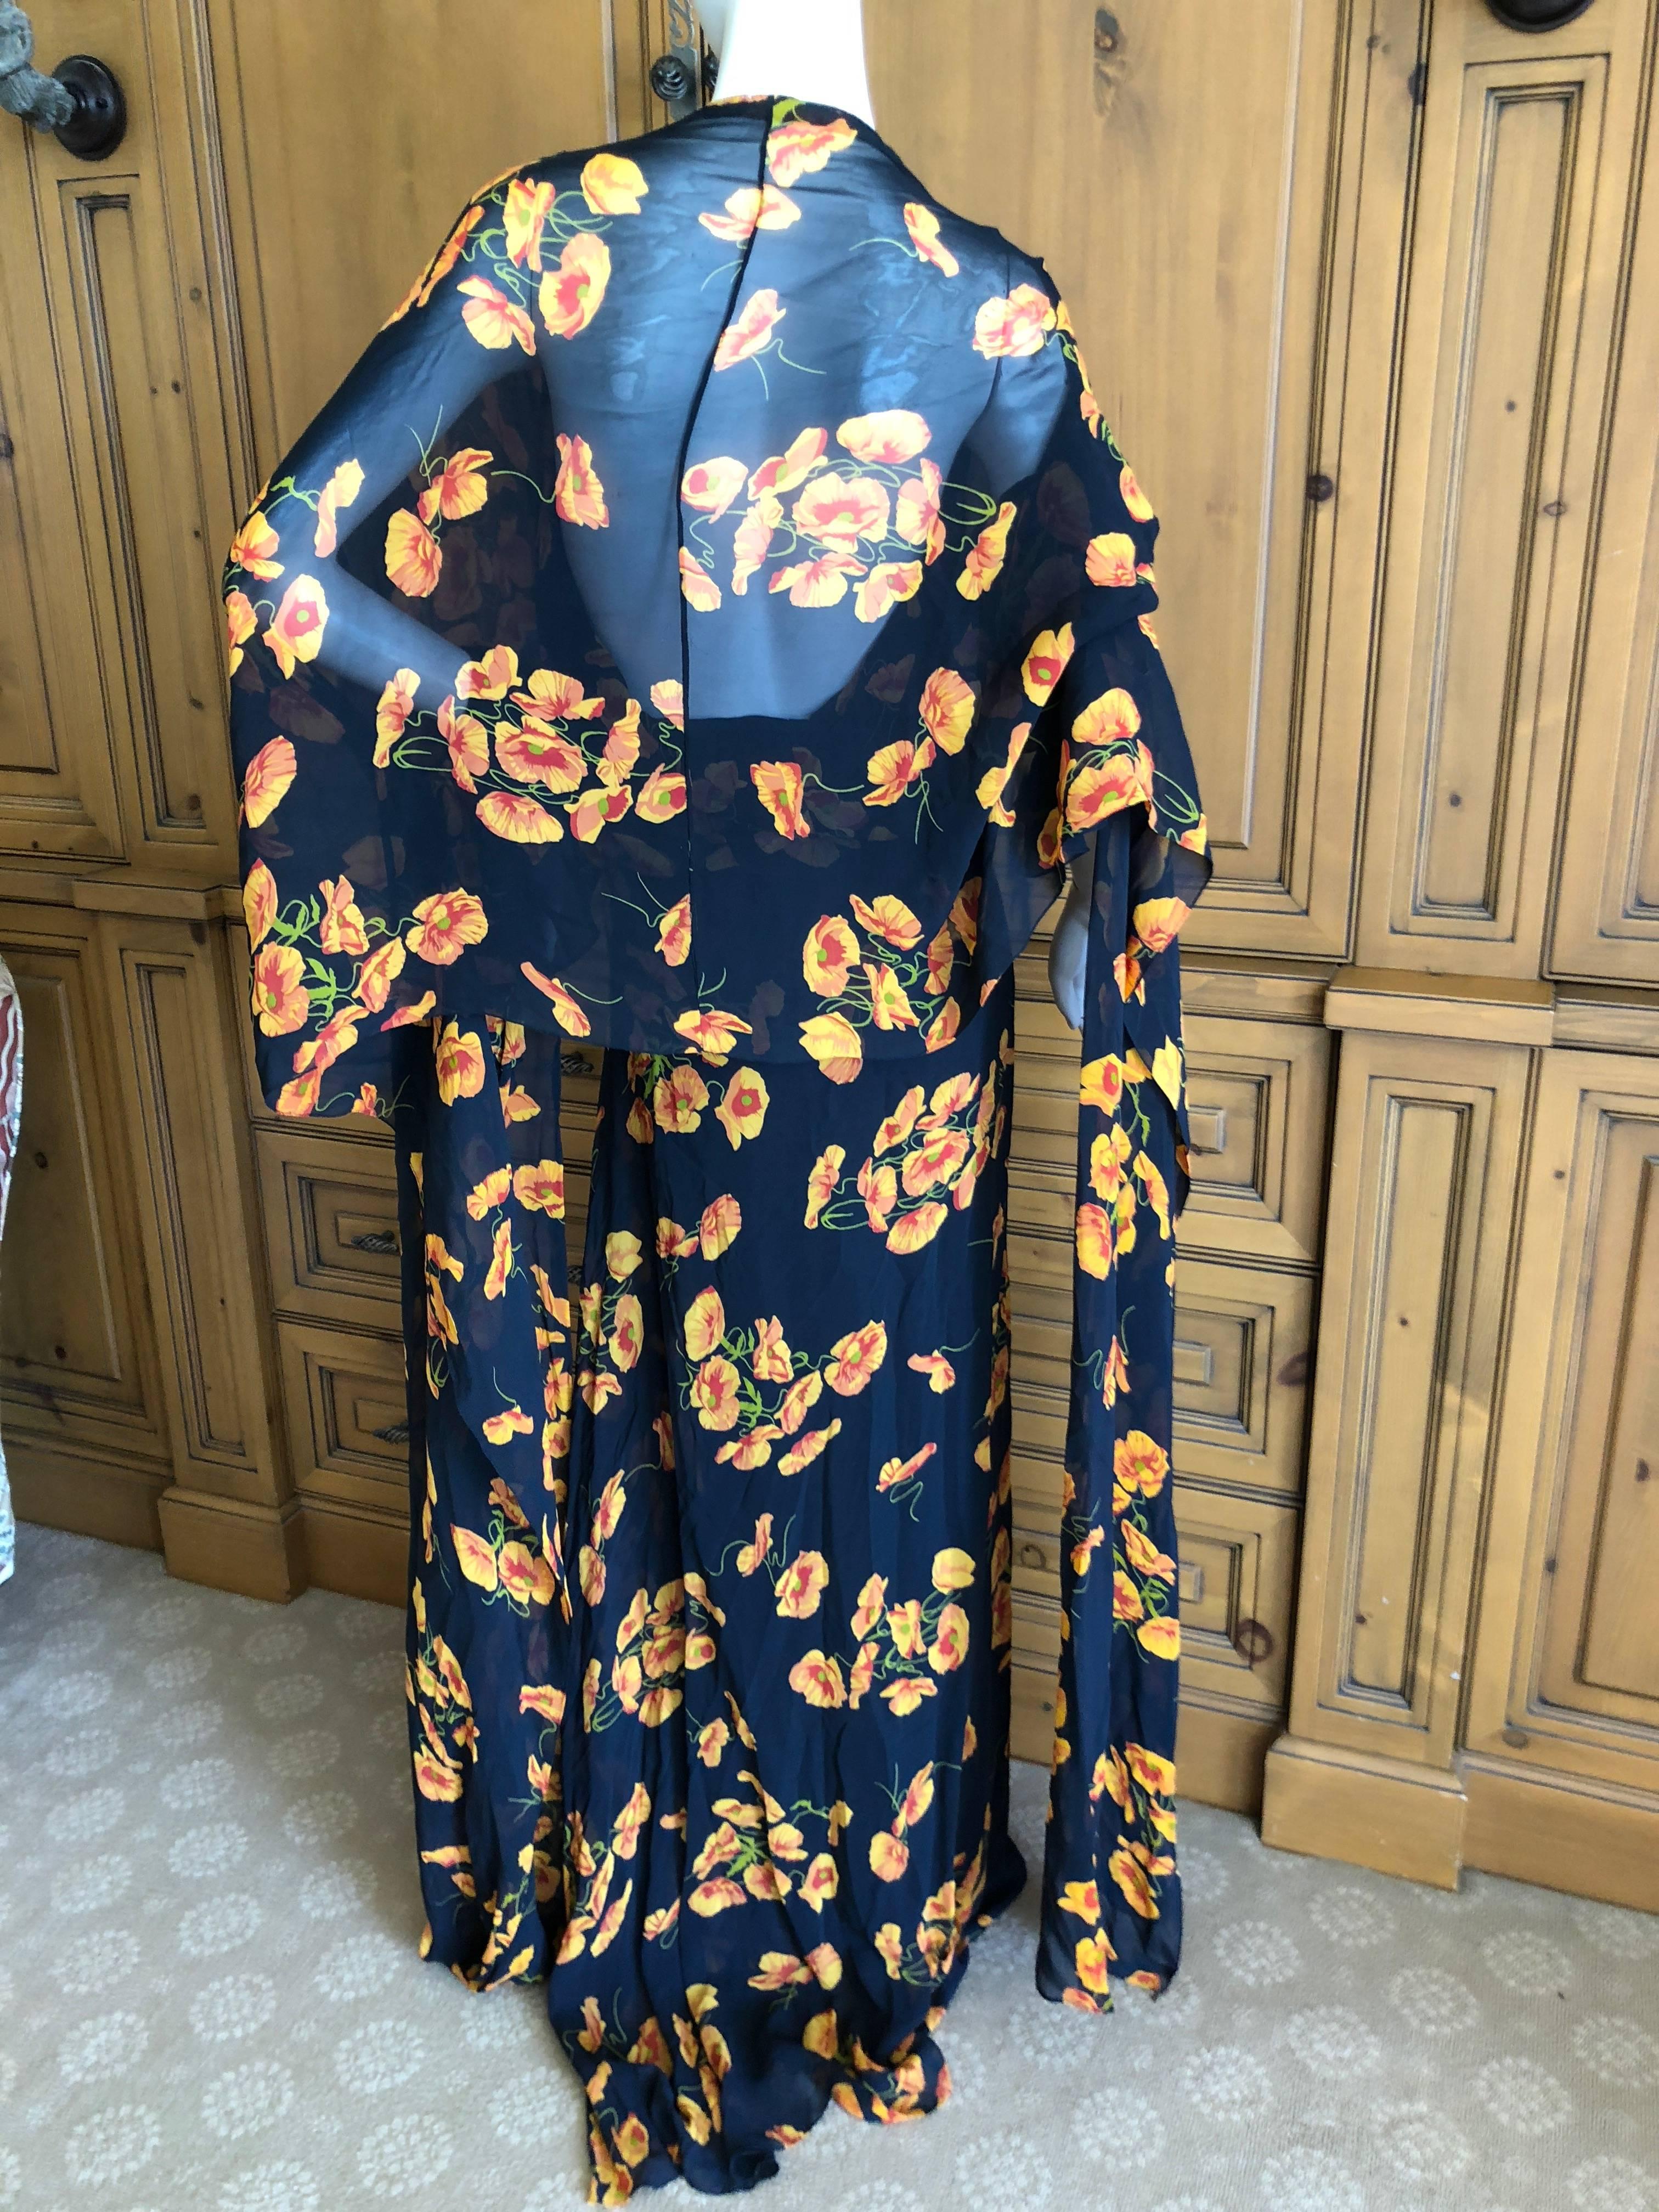 Cardinali Silk Chiffon Floral Poppy Print Evening Dress with Unusual Cape Back  In Excellent Condition For Sale In Cloverdale, CA